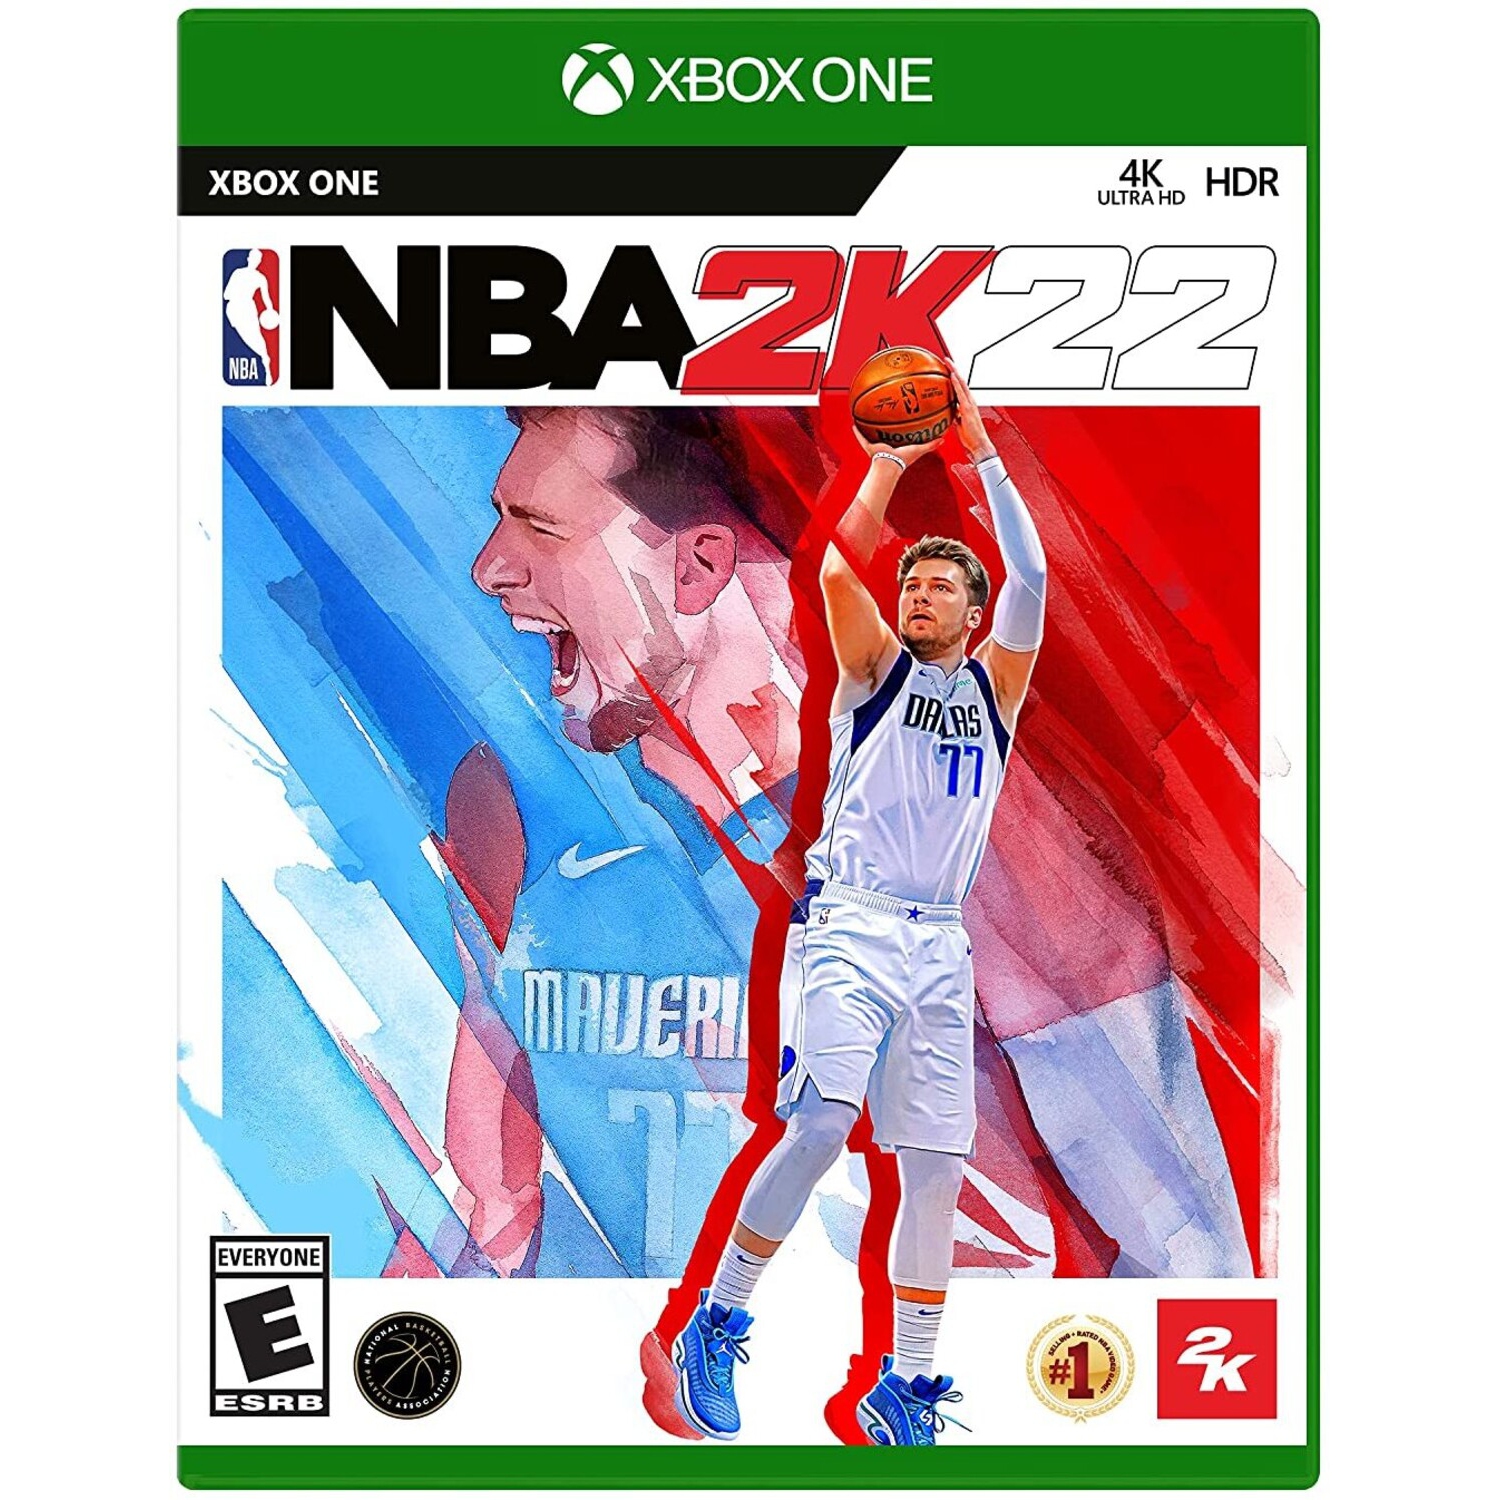 NBA 2K22 for Xbox One [VIDEOGAMES]